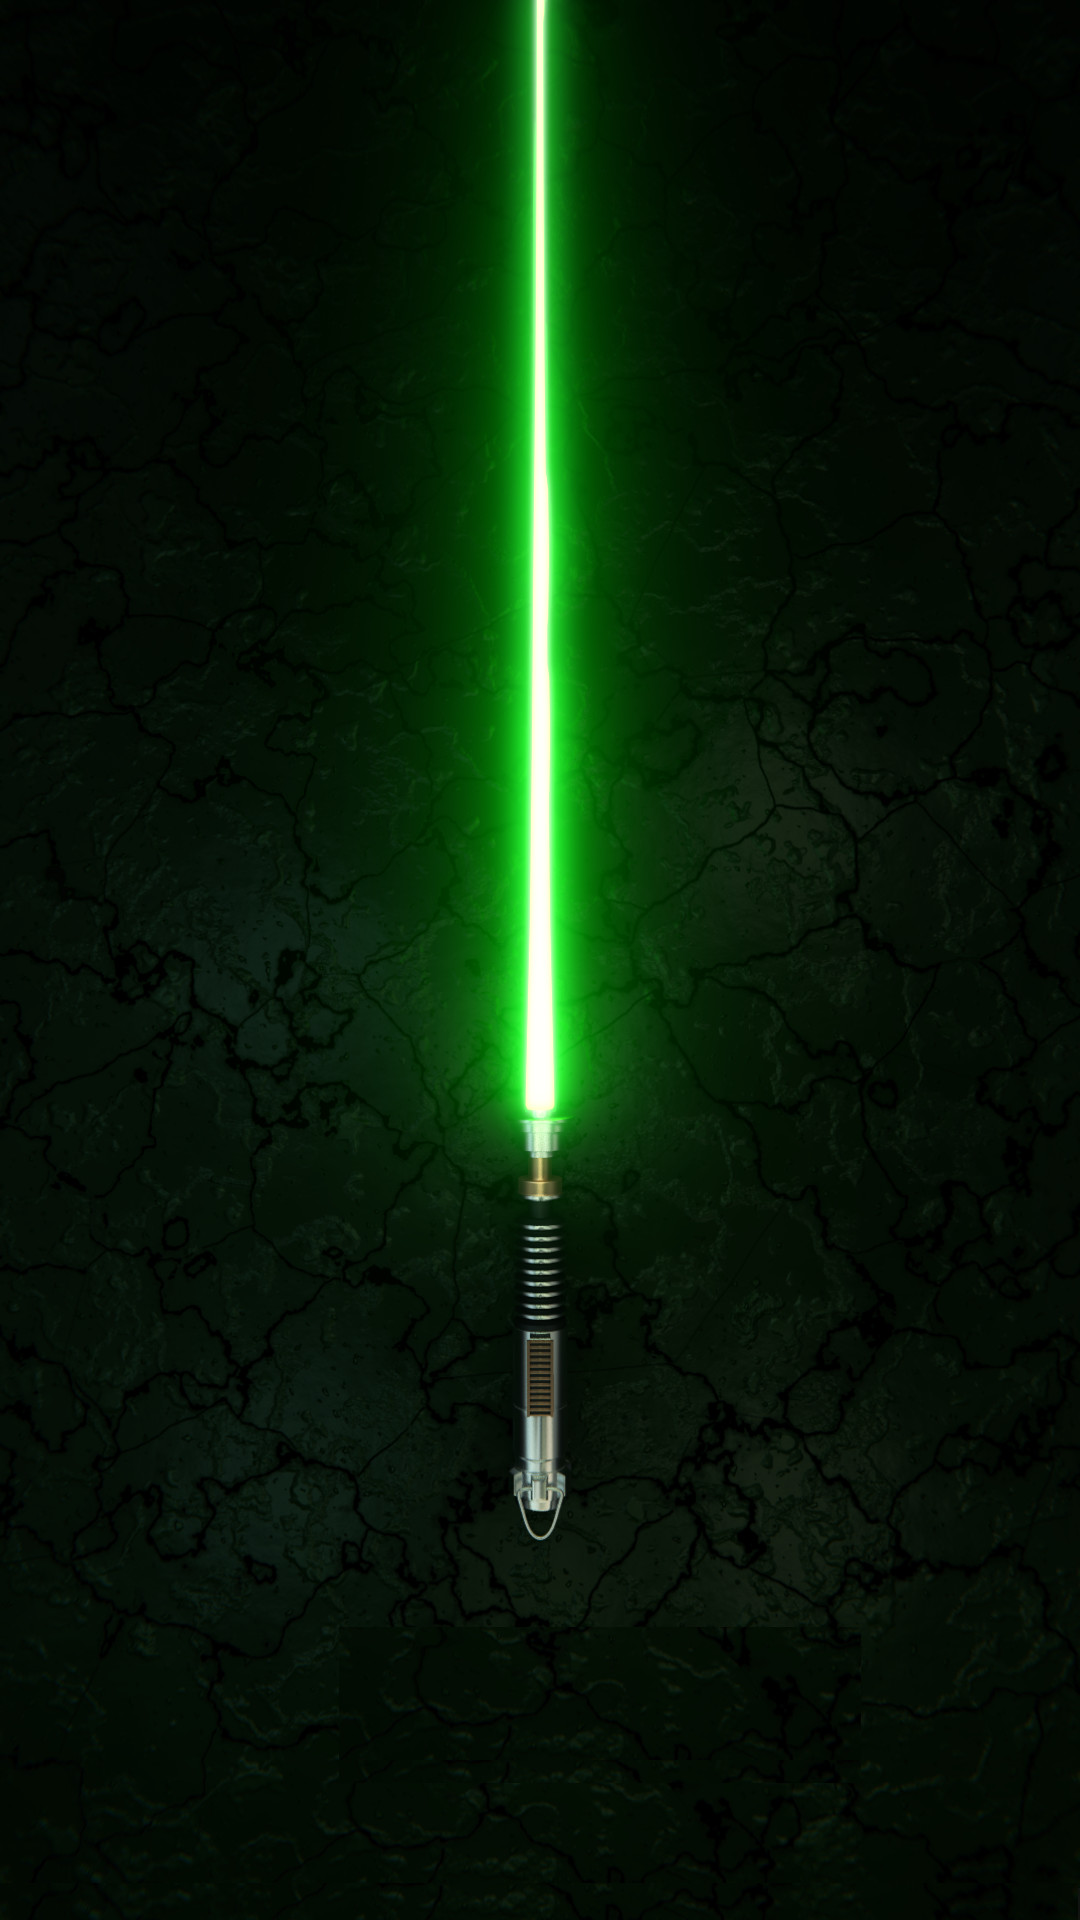 1080x1920 Star Wars Lightsaber - Tap to see more exciting Star Wars wallpaper!  @mobile9